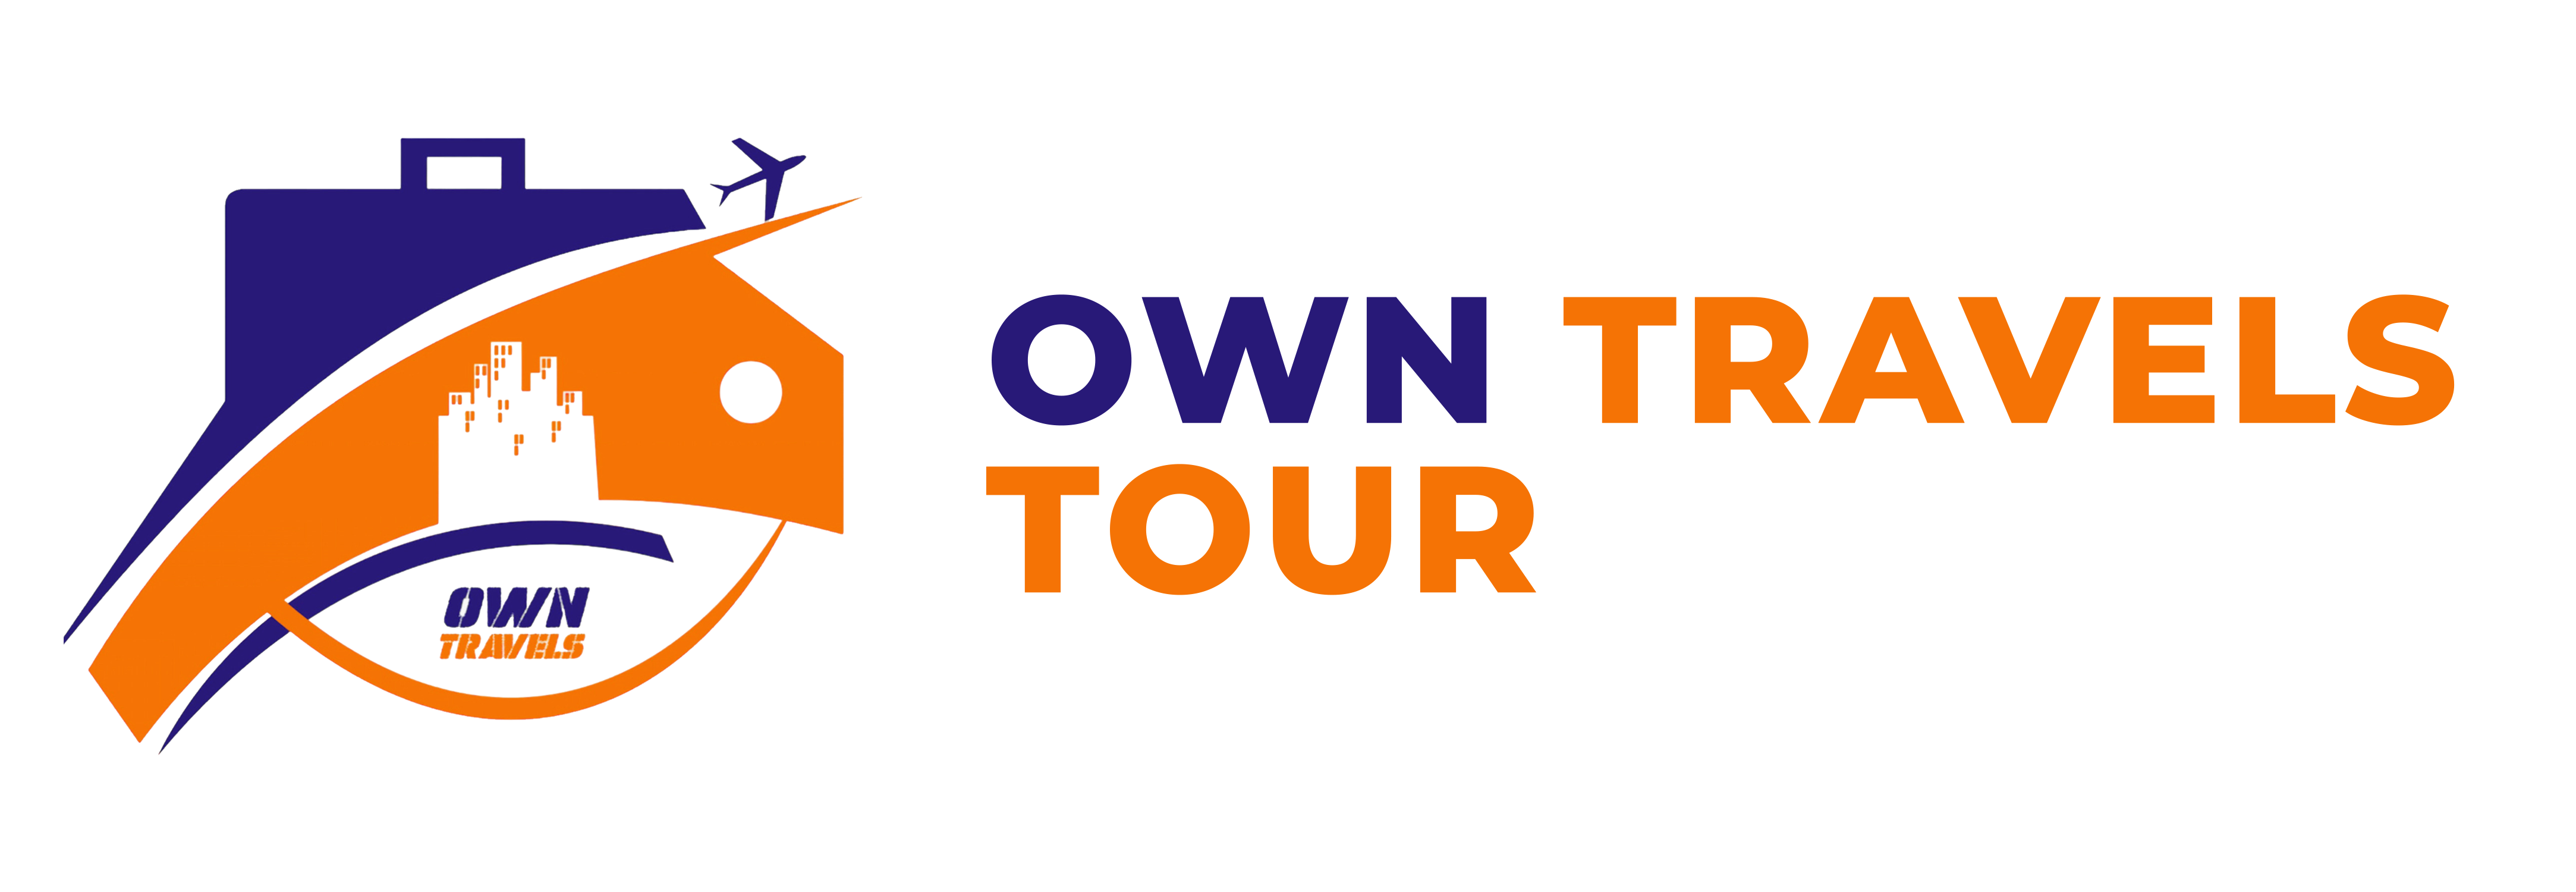 our own world tours and travels